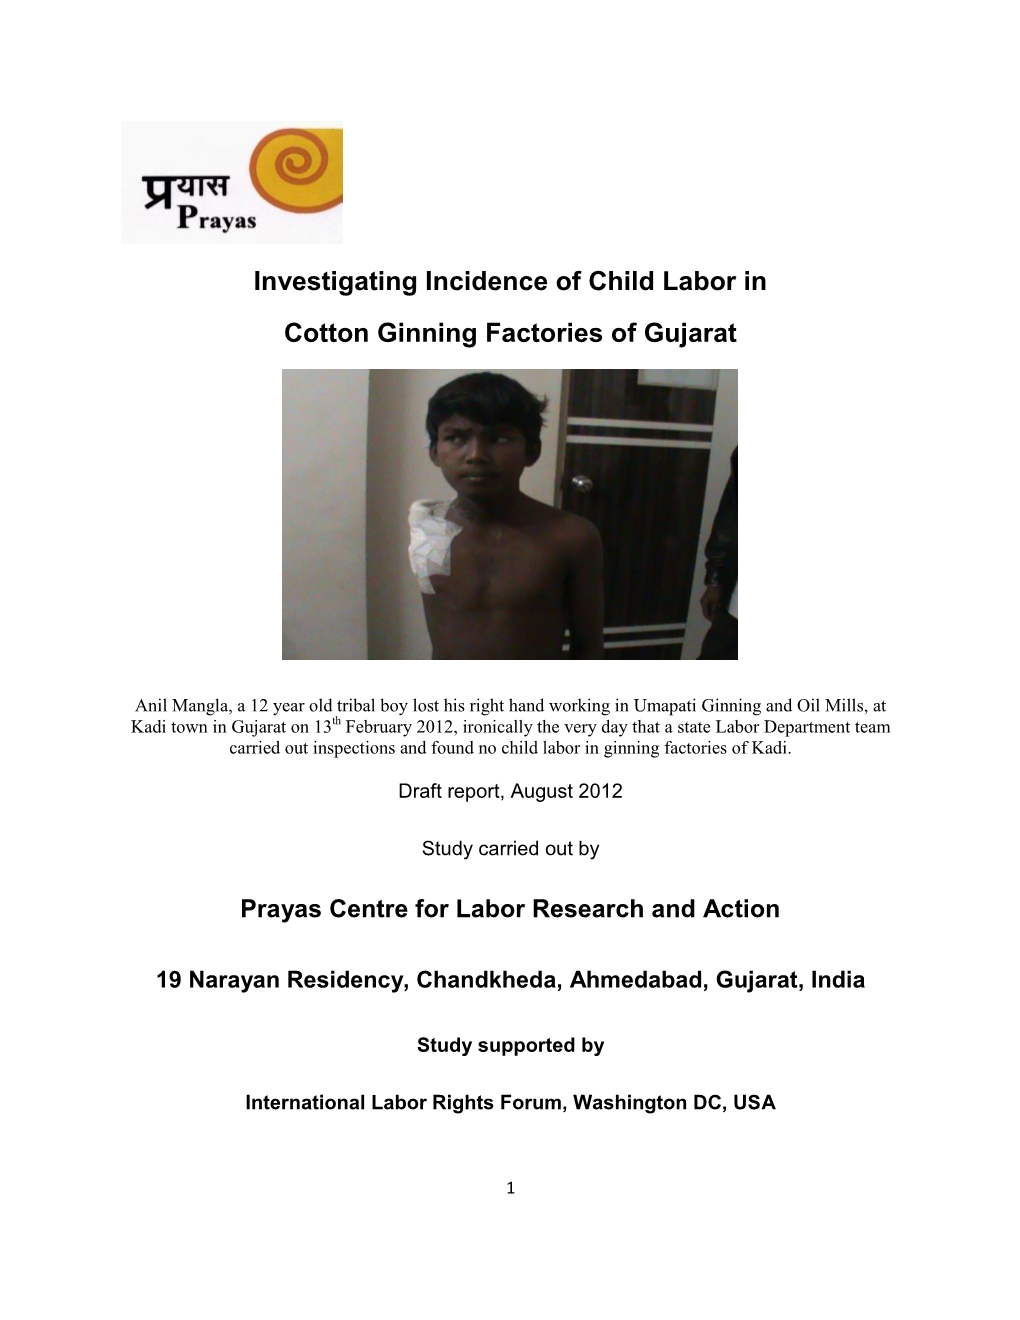 Investigating Incidence of Child Labor in Cotton Ginning Factories of Gujarat